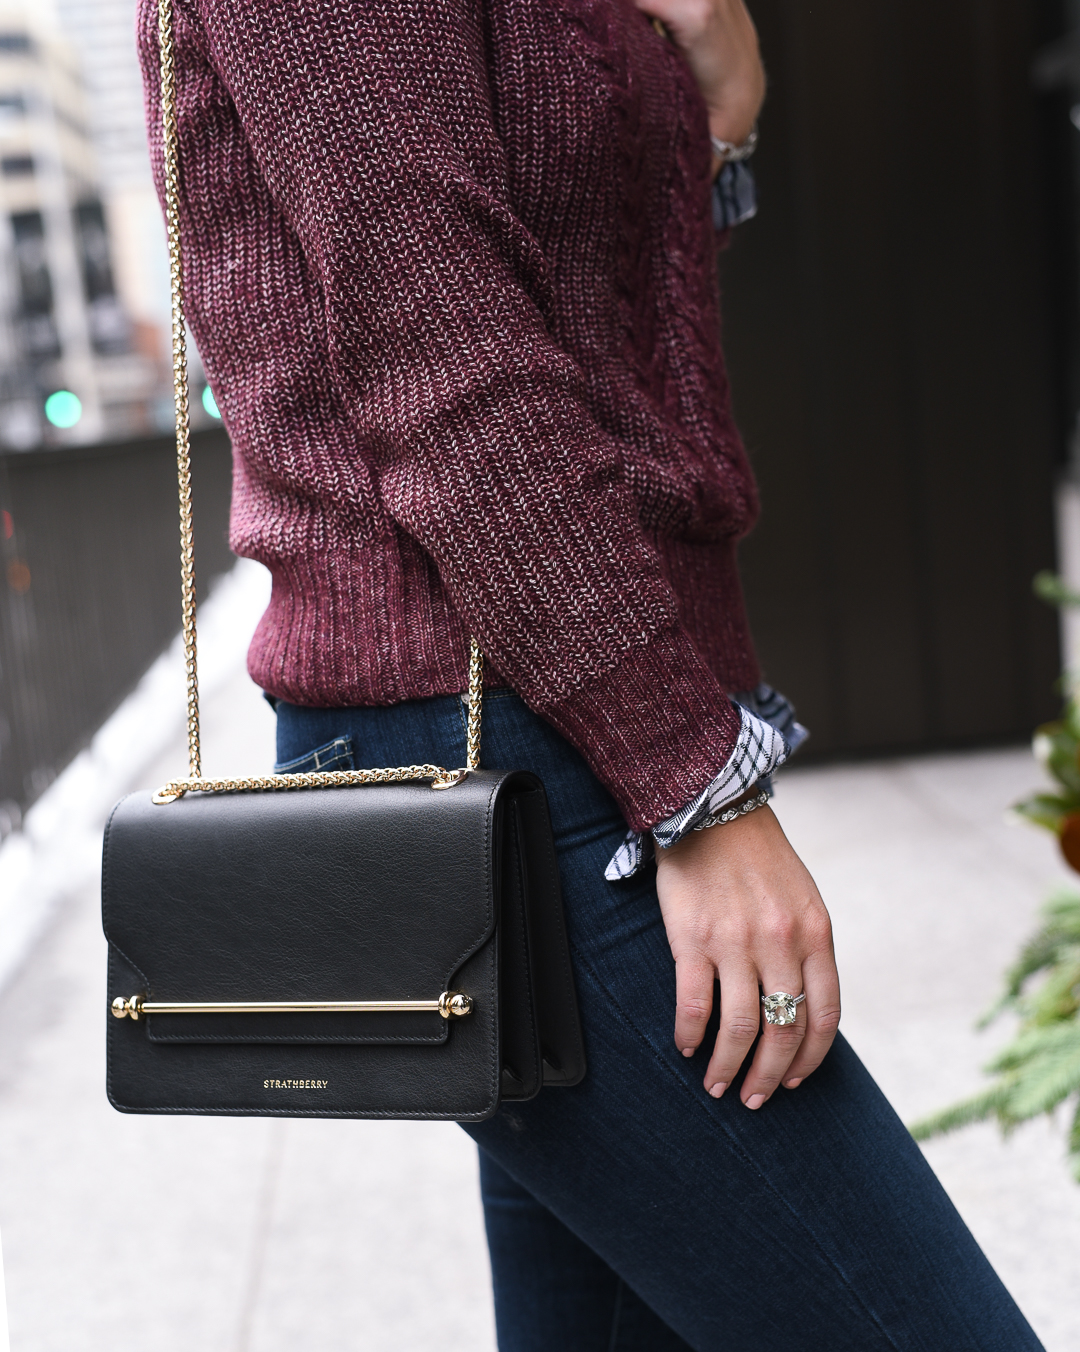 black leather strathberry bag - Best Cute Affordable Sweater for Layering by Chicago style blogger Visions of Vogue